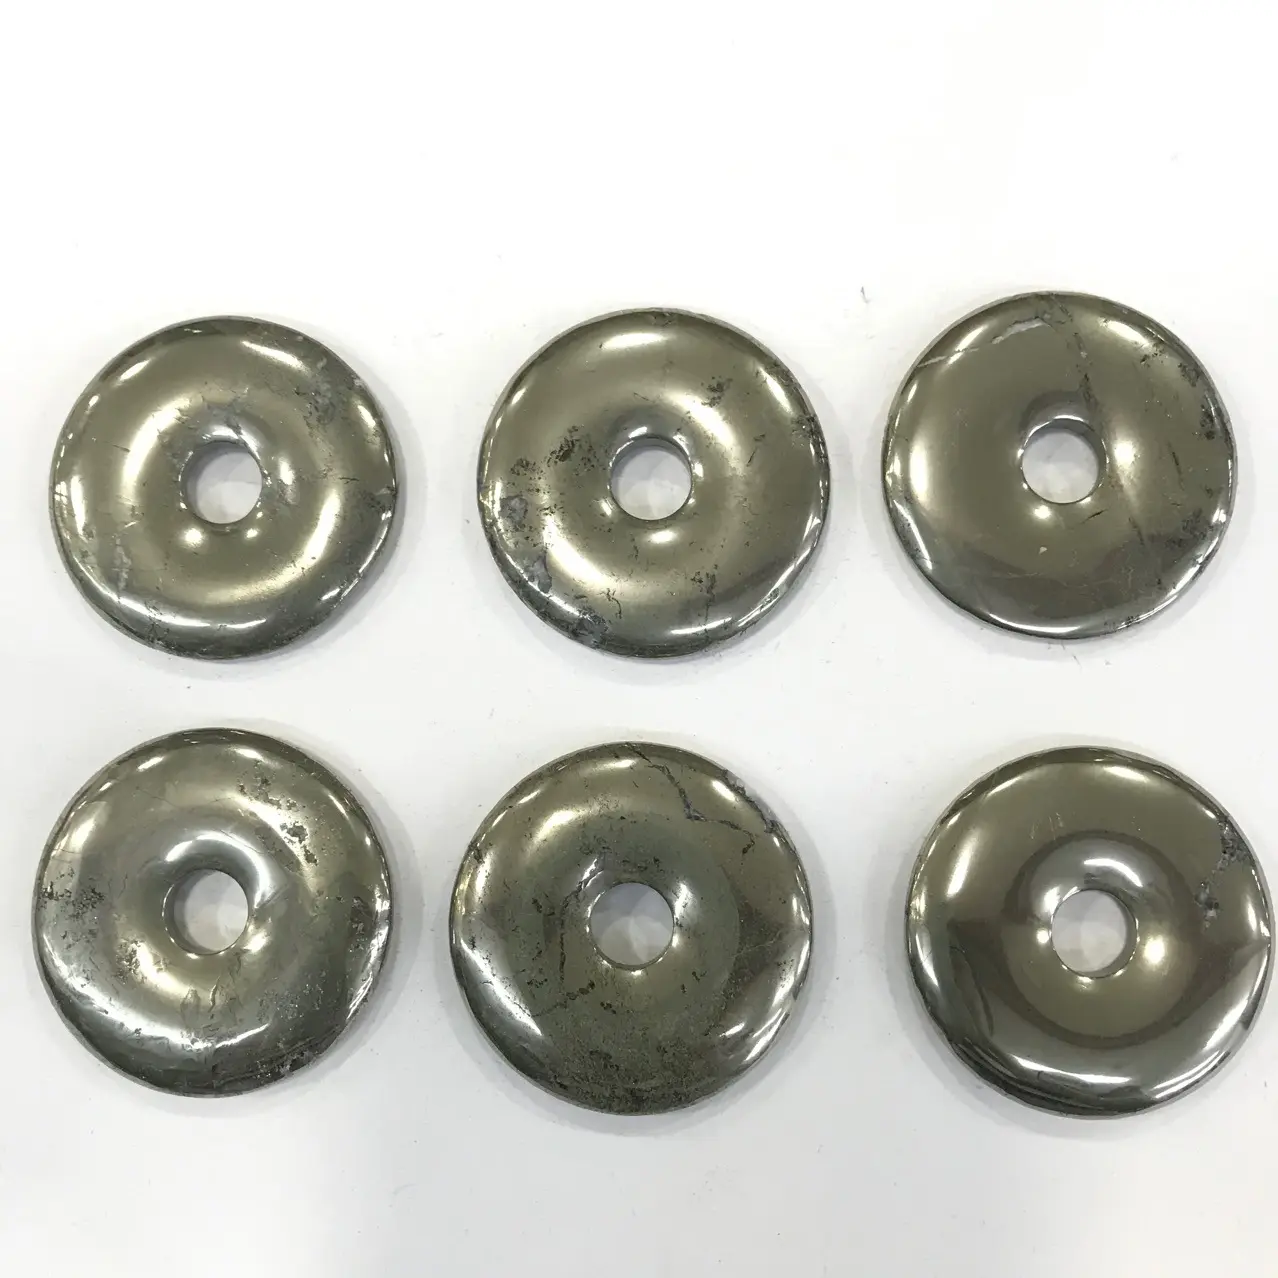 Hot Wholesale Natural Stone pyrite Donut 25mm 30mm 35mm 40mm 45mm 50mm Pendant For Jewelry Making